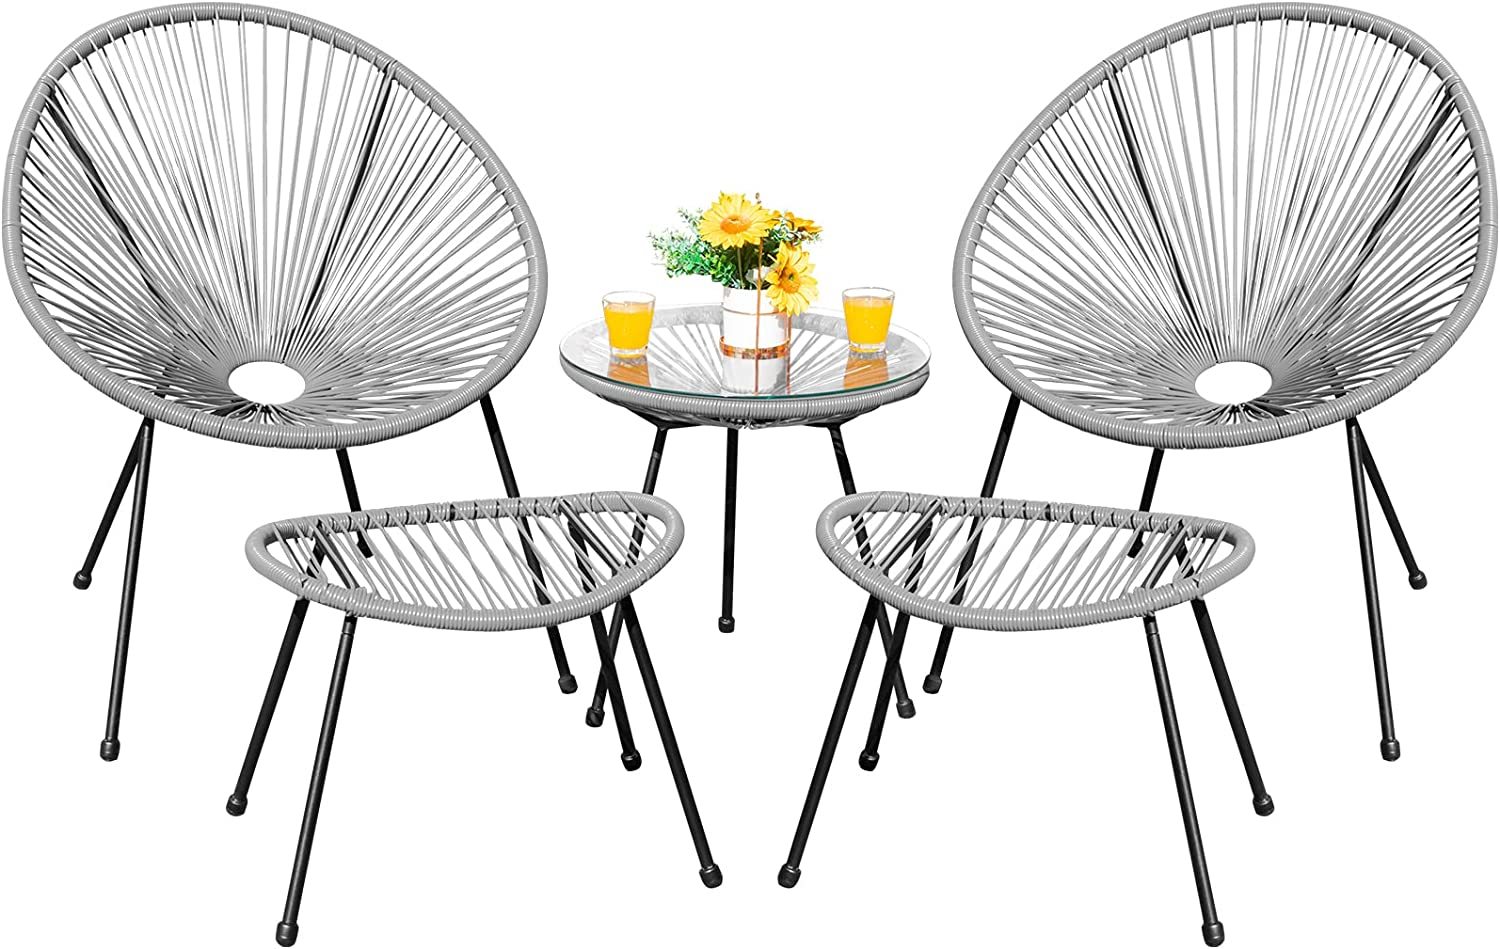 5 Piece Acapulco Outdoor Rattan Chairs and Table